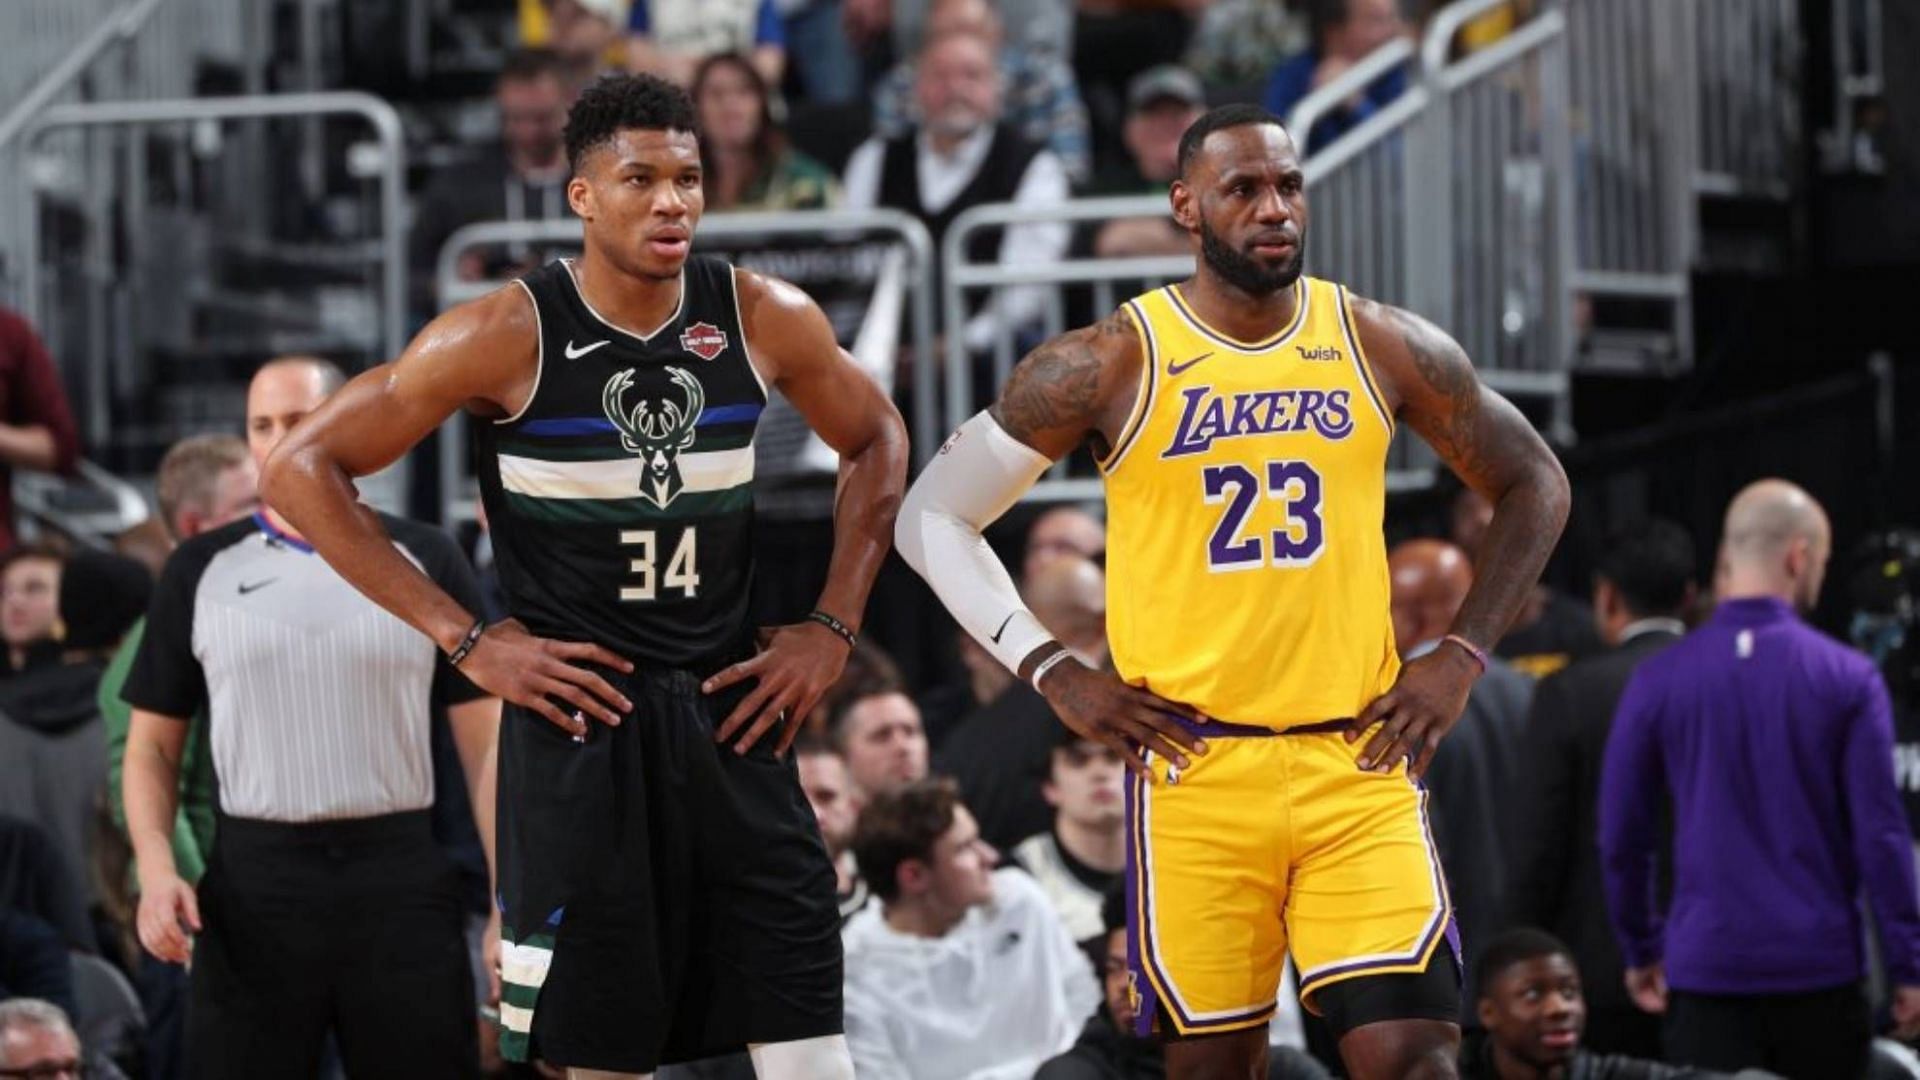 Giannis Antetokounmpo and LeBron James could be the captains for the NBA All-Star Draft